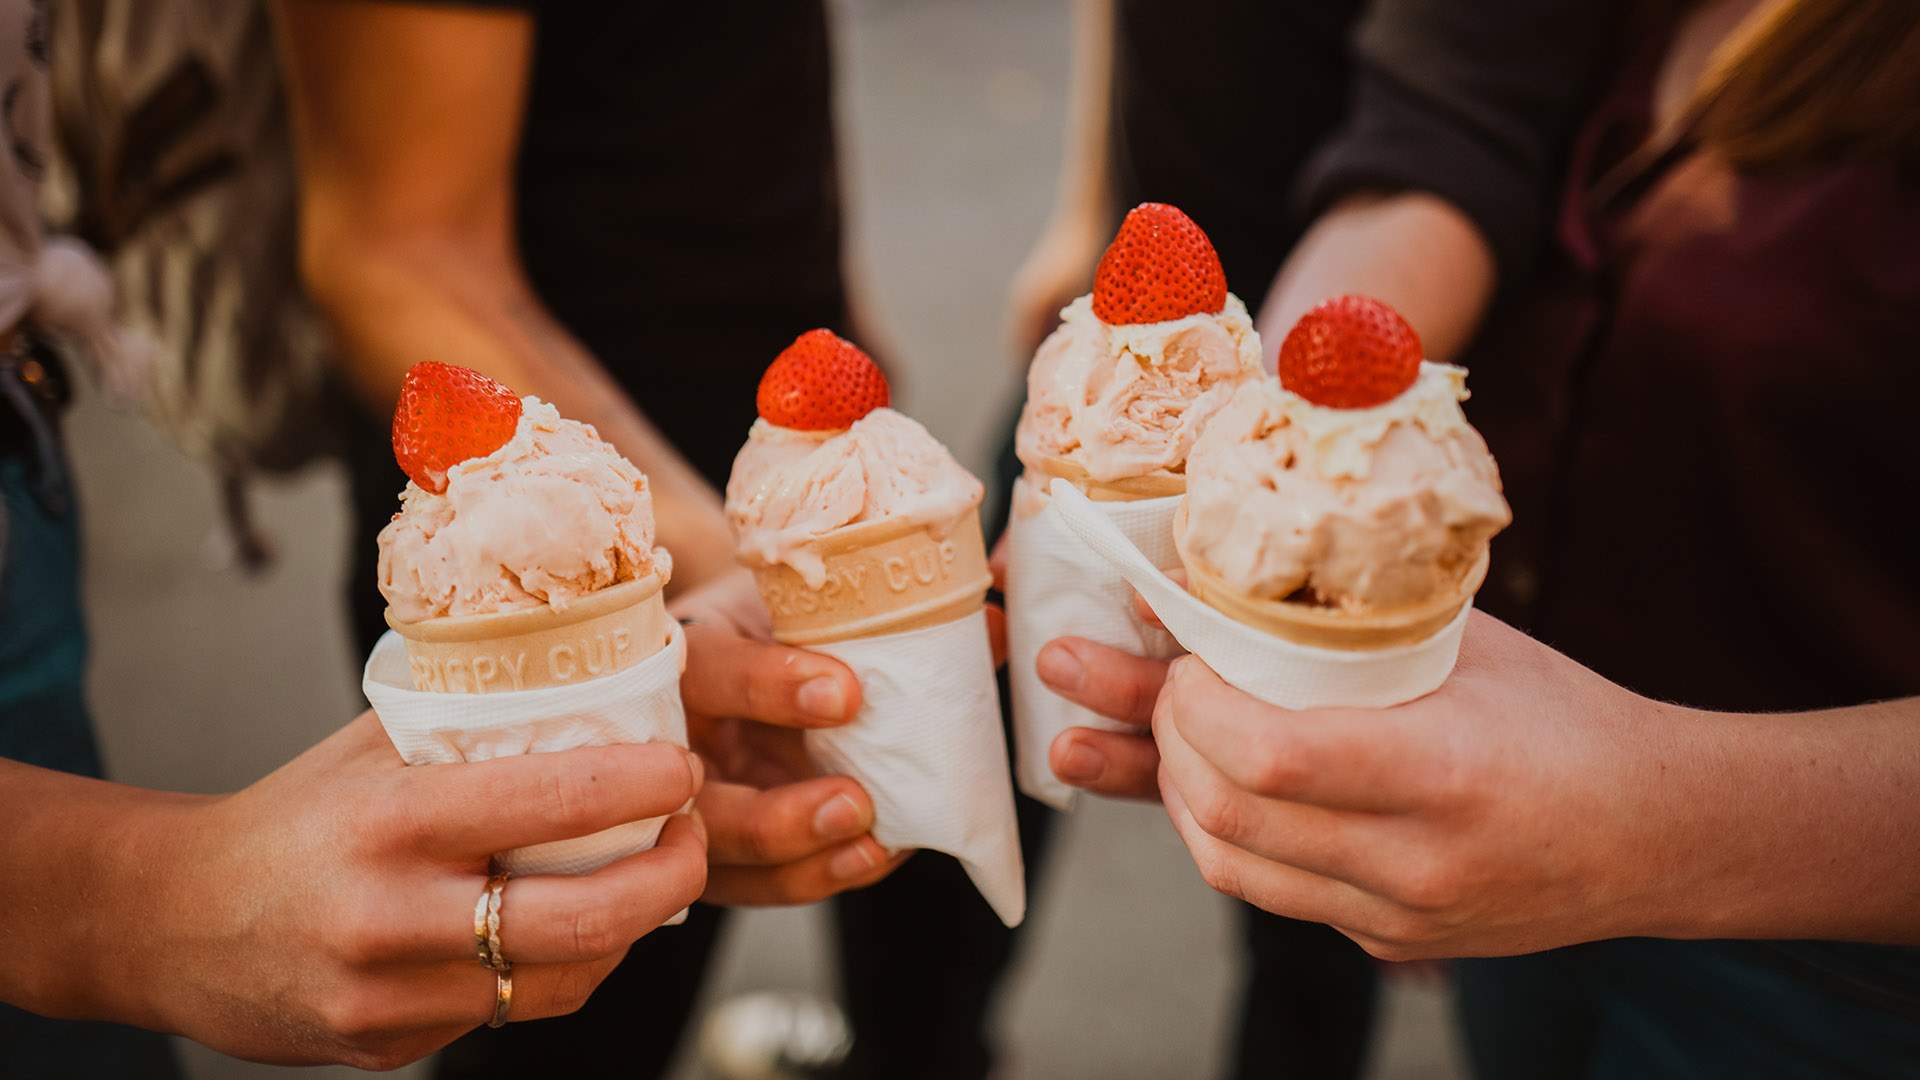 Strawberry Sundae Alert: The Ekka Is Finally Set to Return in August for the First Time Since 2019